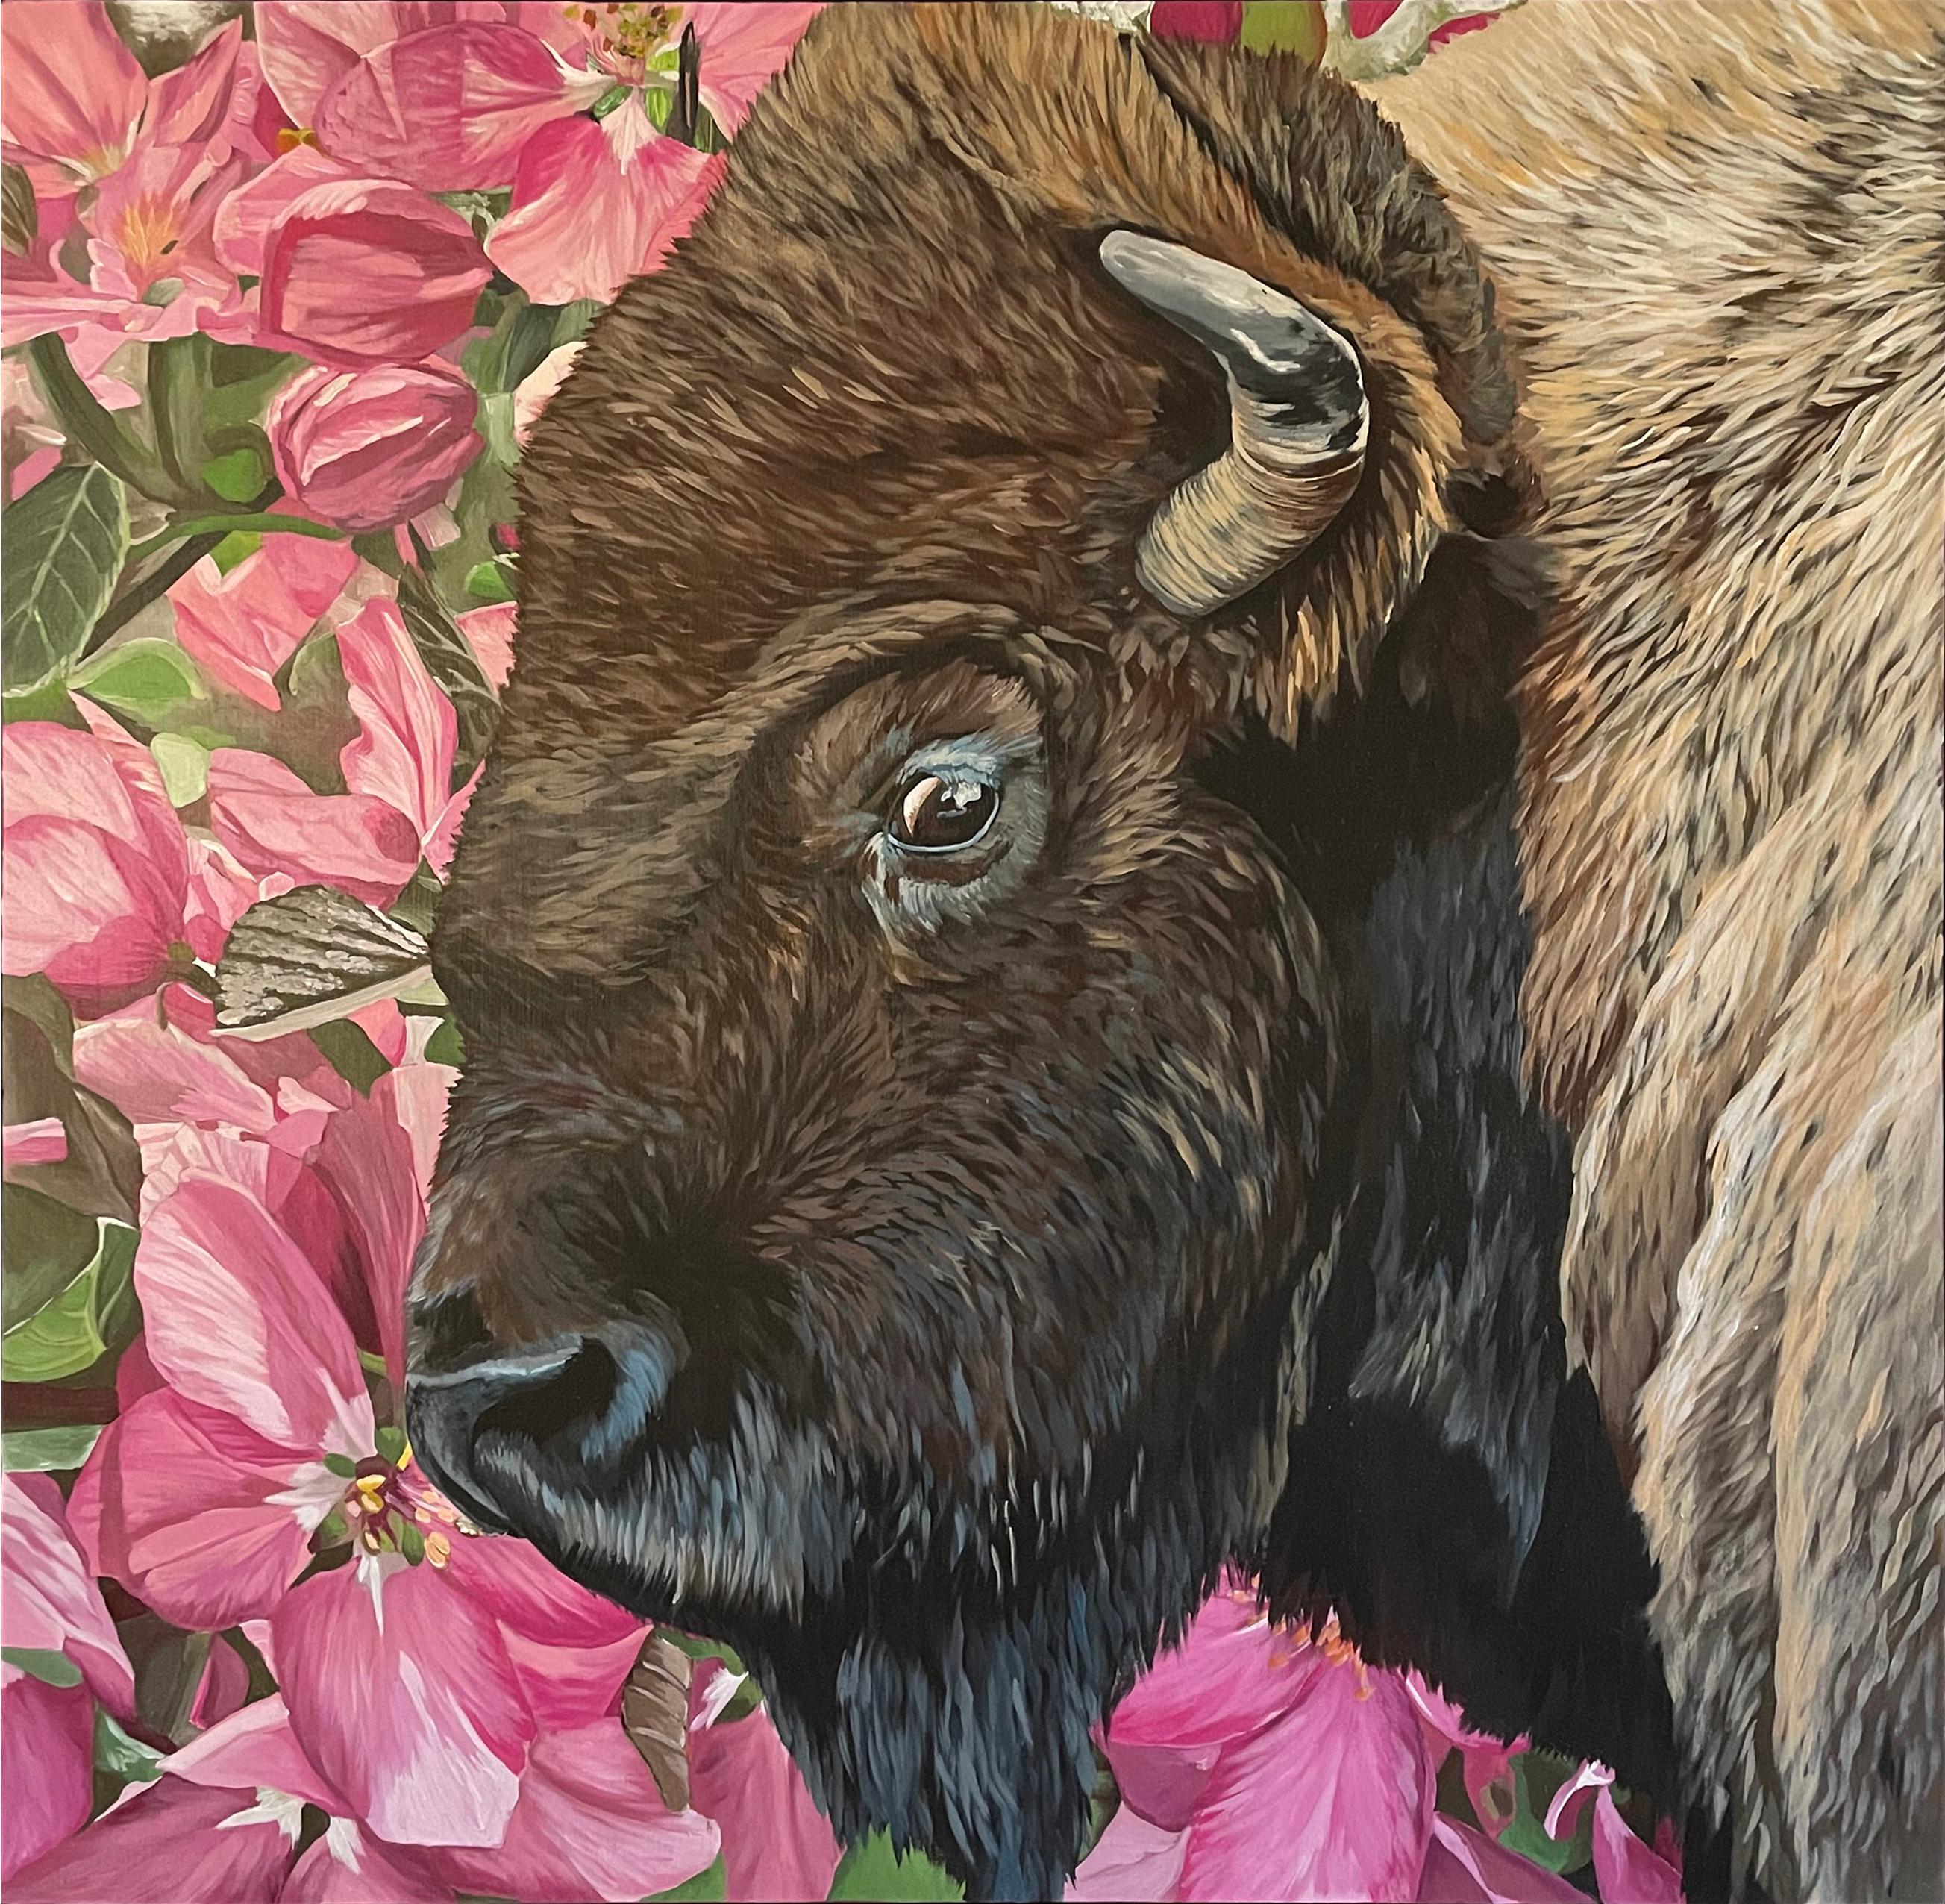 bison painting